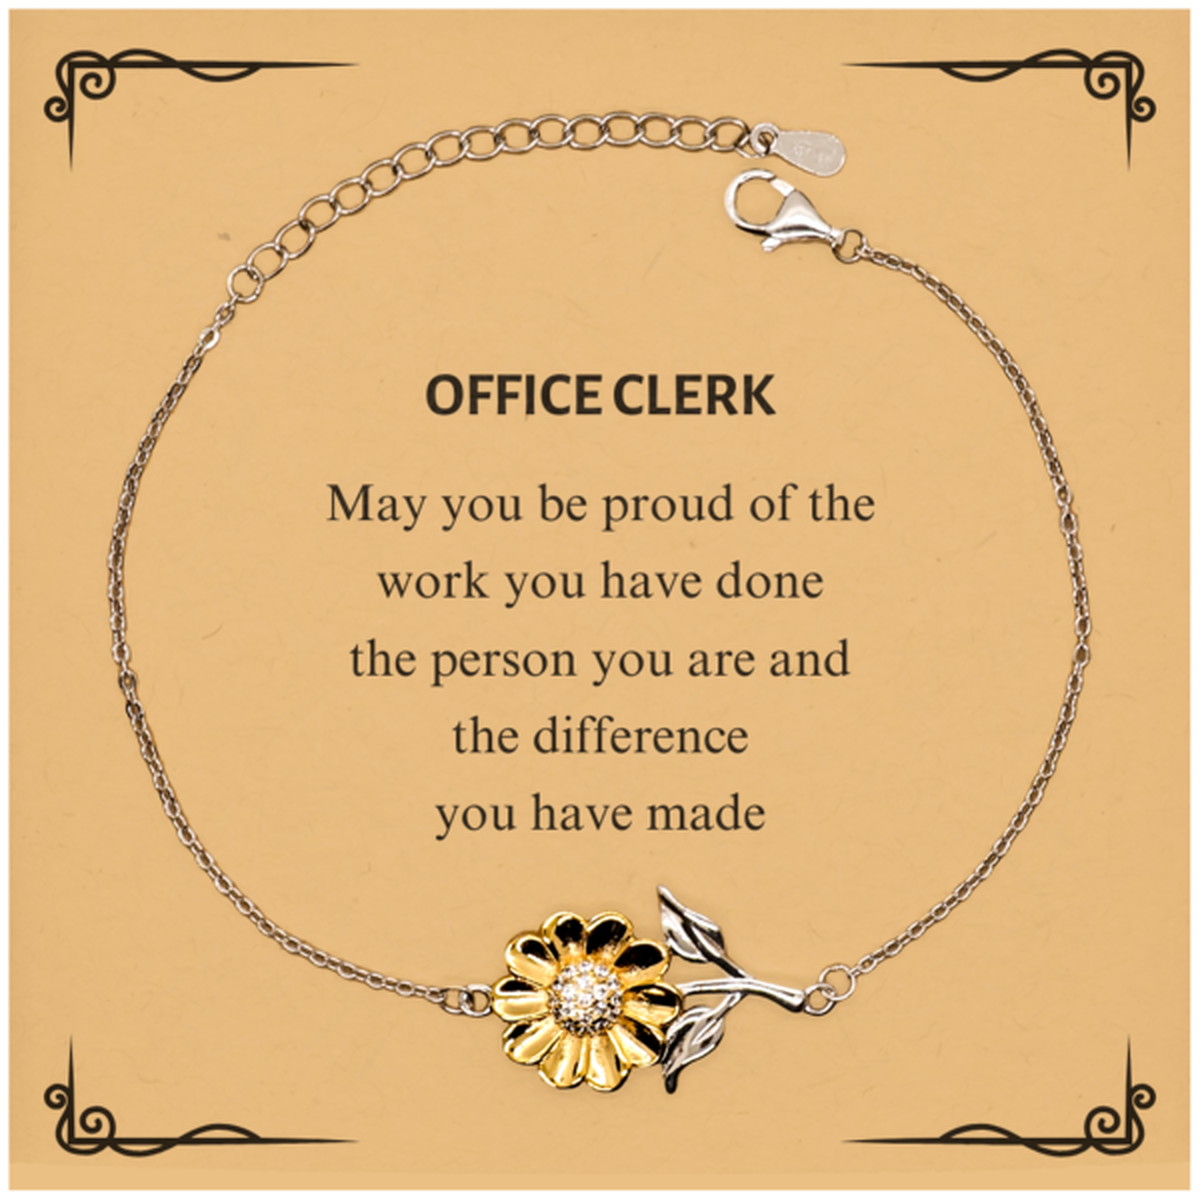 Office Clerk May you be proud of the work you have done, Retirement Office Clerk Sunflower Bracelet for Colleague Appreciation Gifts Amazing for Office Clerk